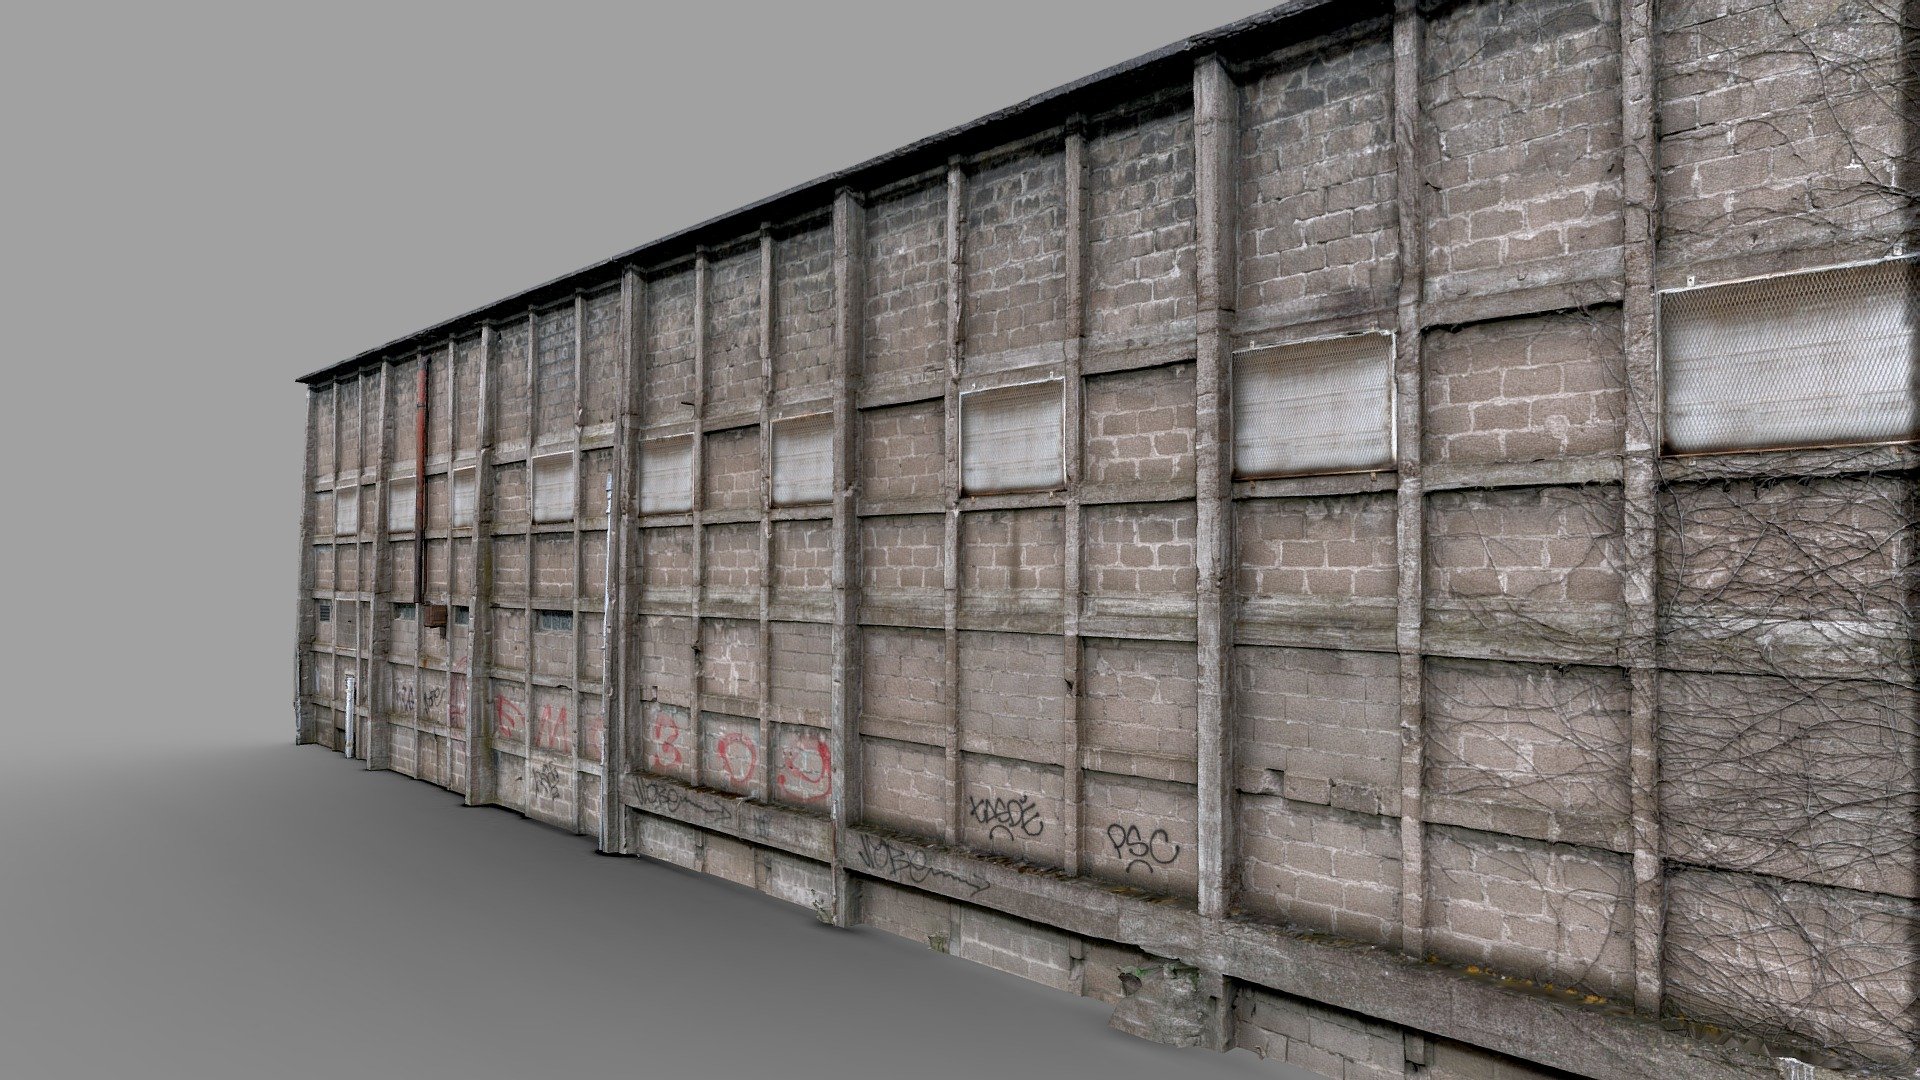 Building scan No. 6

[TURN HD ON] Factory side from industrial district

8k textures for viewer but 16k original textures packed in files.

Urban &amp; Industrial collections

Good for adding realism to your urban / abandoned scenes

diffuse/normal/specular - Building scan No. 6 - Download Free 3D model by 3Dystopia (@Dystopia) 3d model